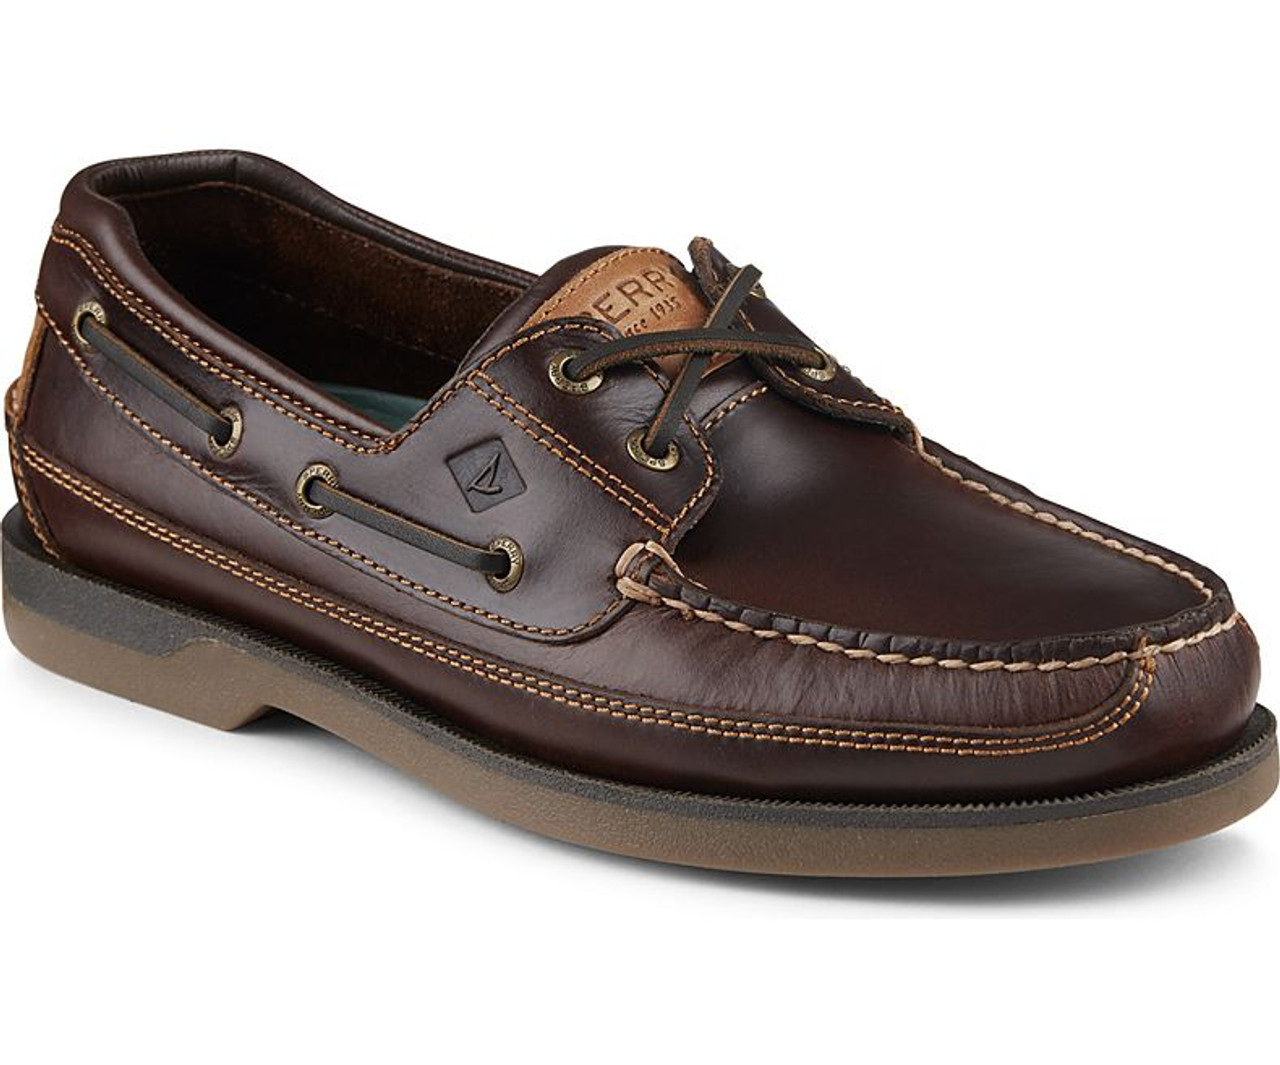 leather shoe strings for sperrys